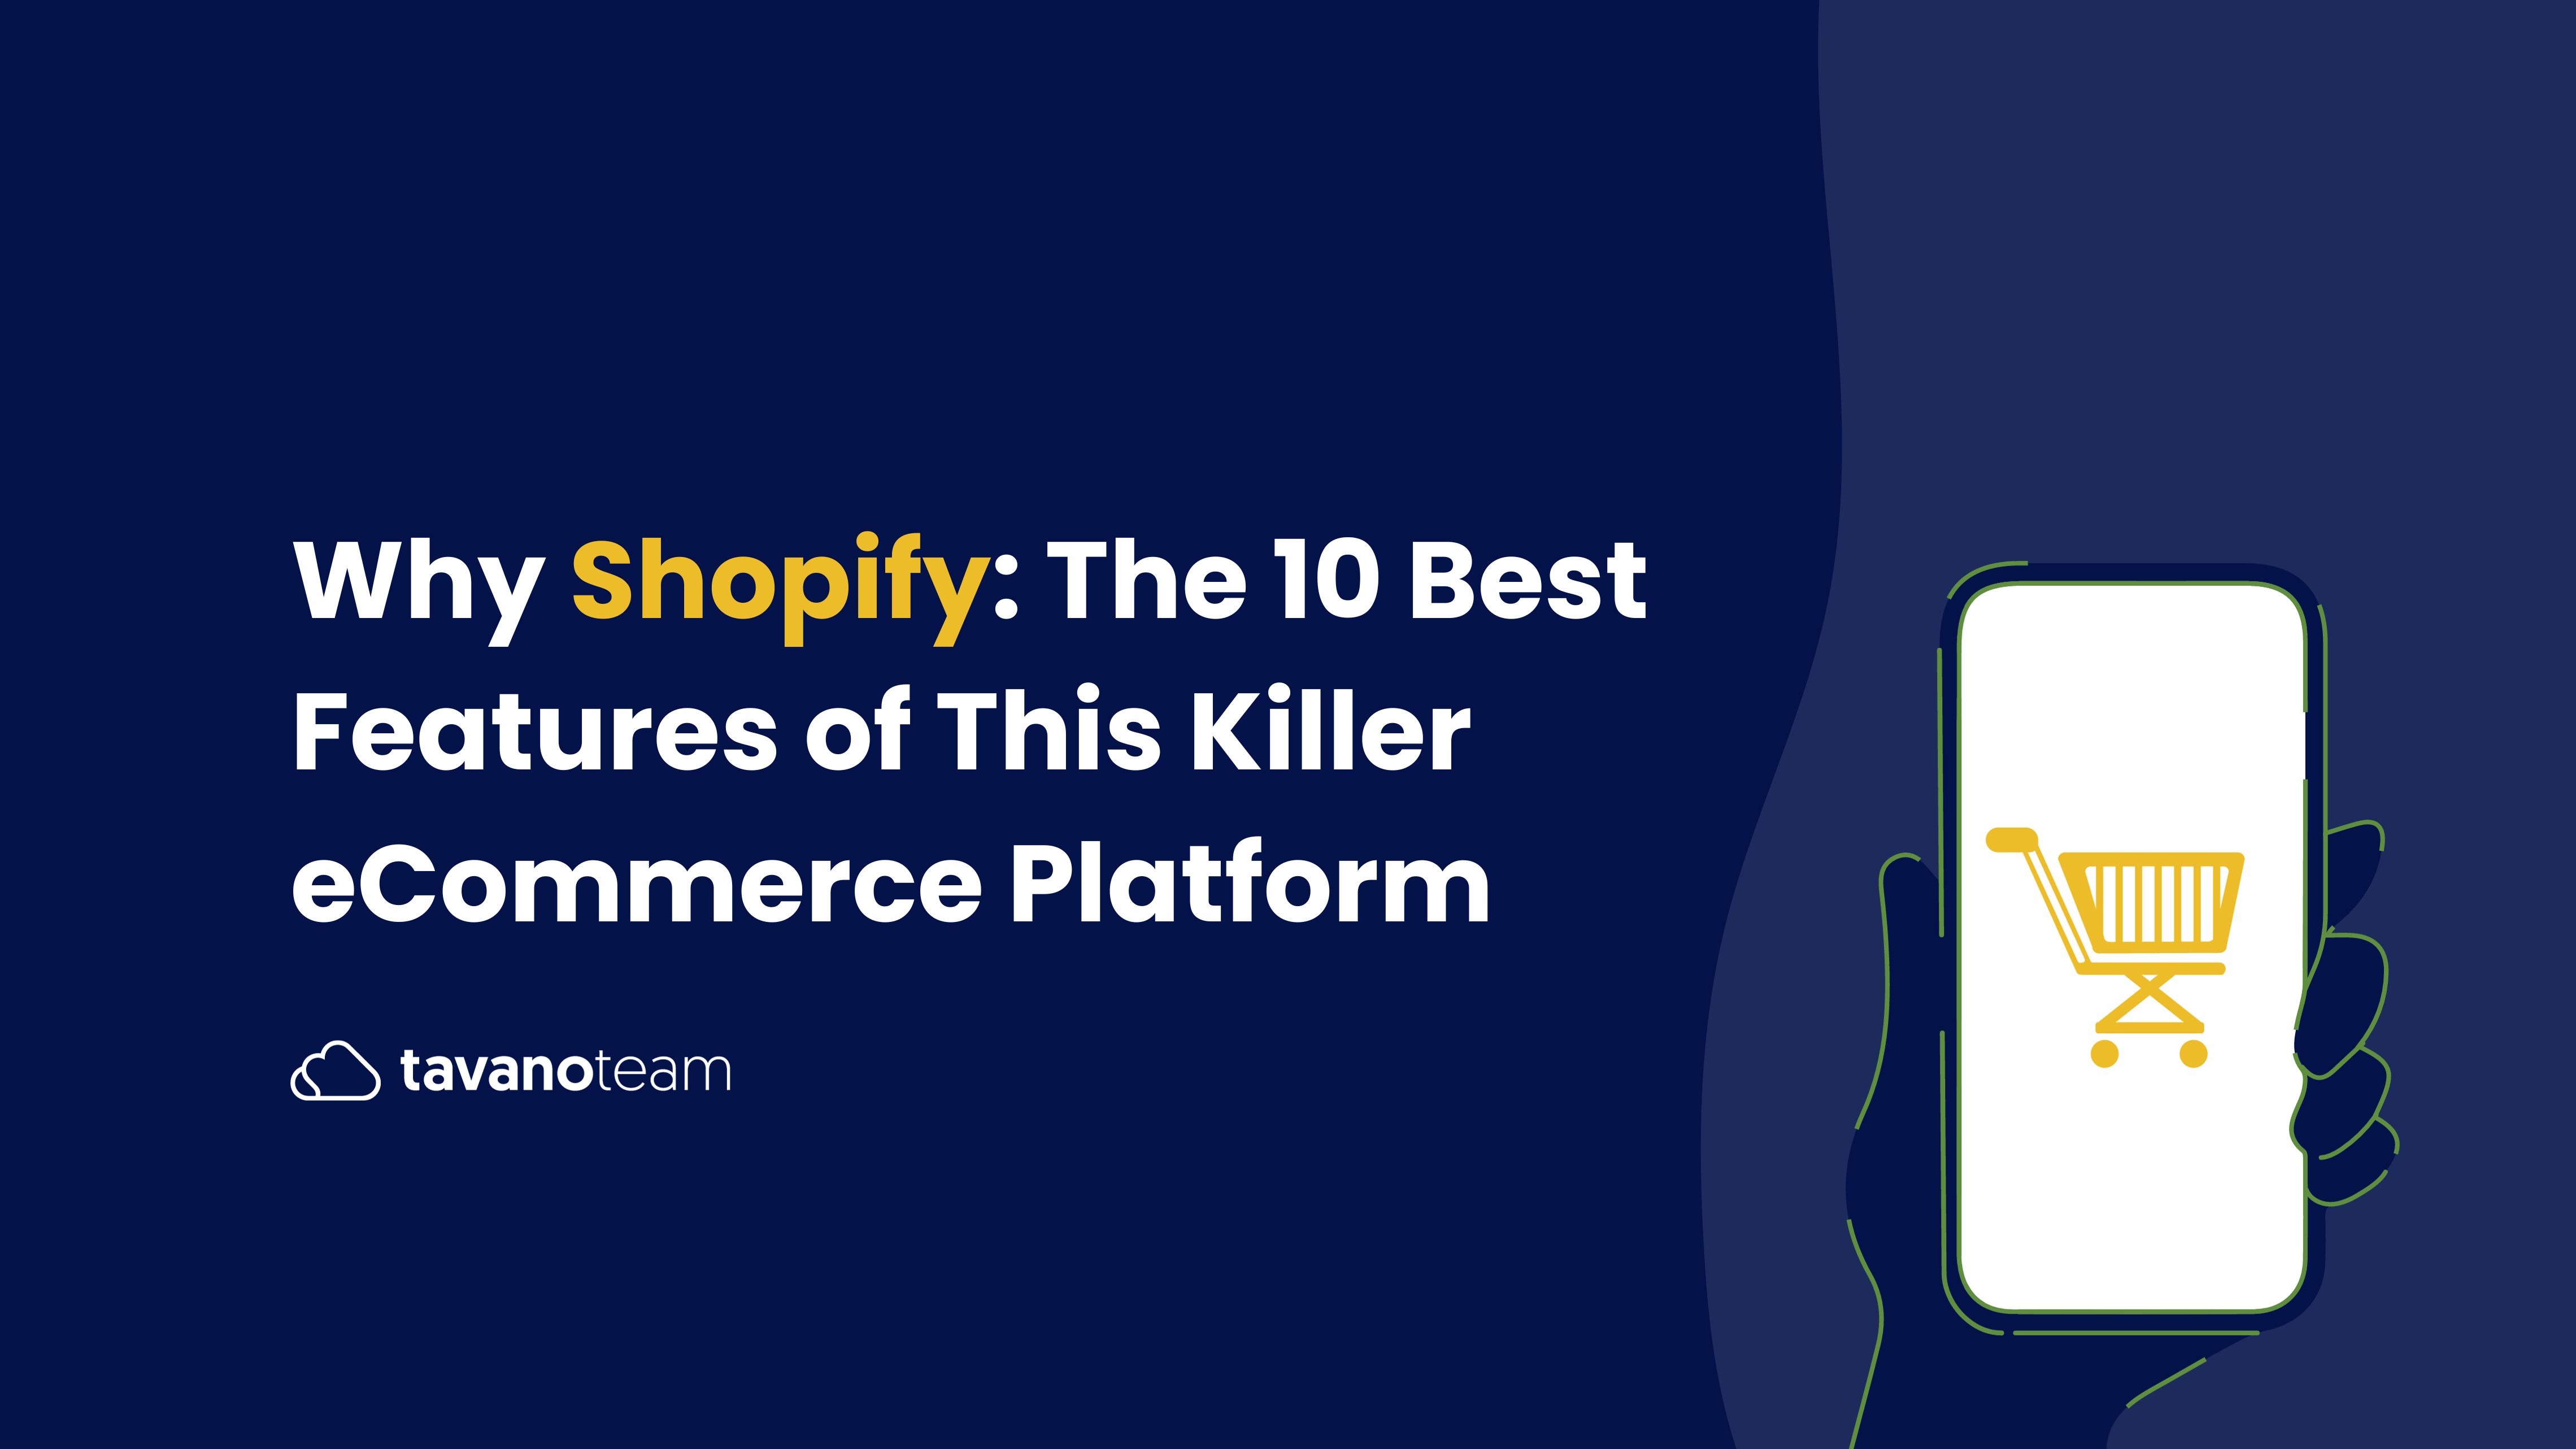 Why-Shopify-The-10-Best-Features-of-This-Killer-eCommerce-Platform